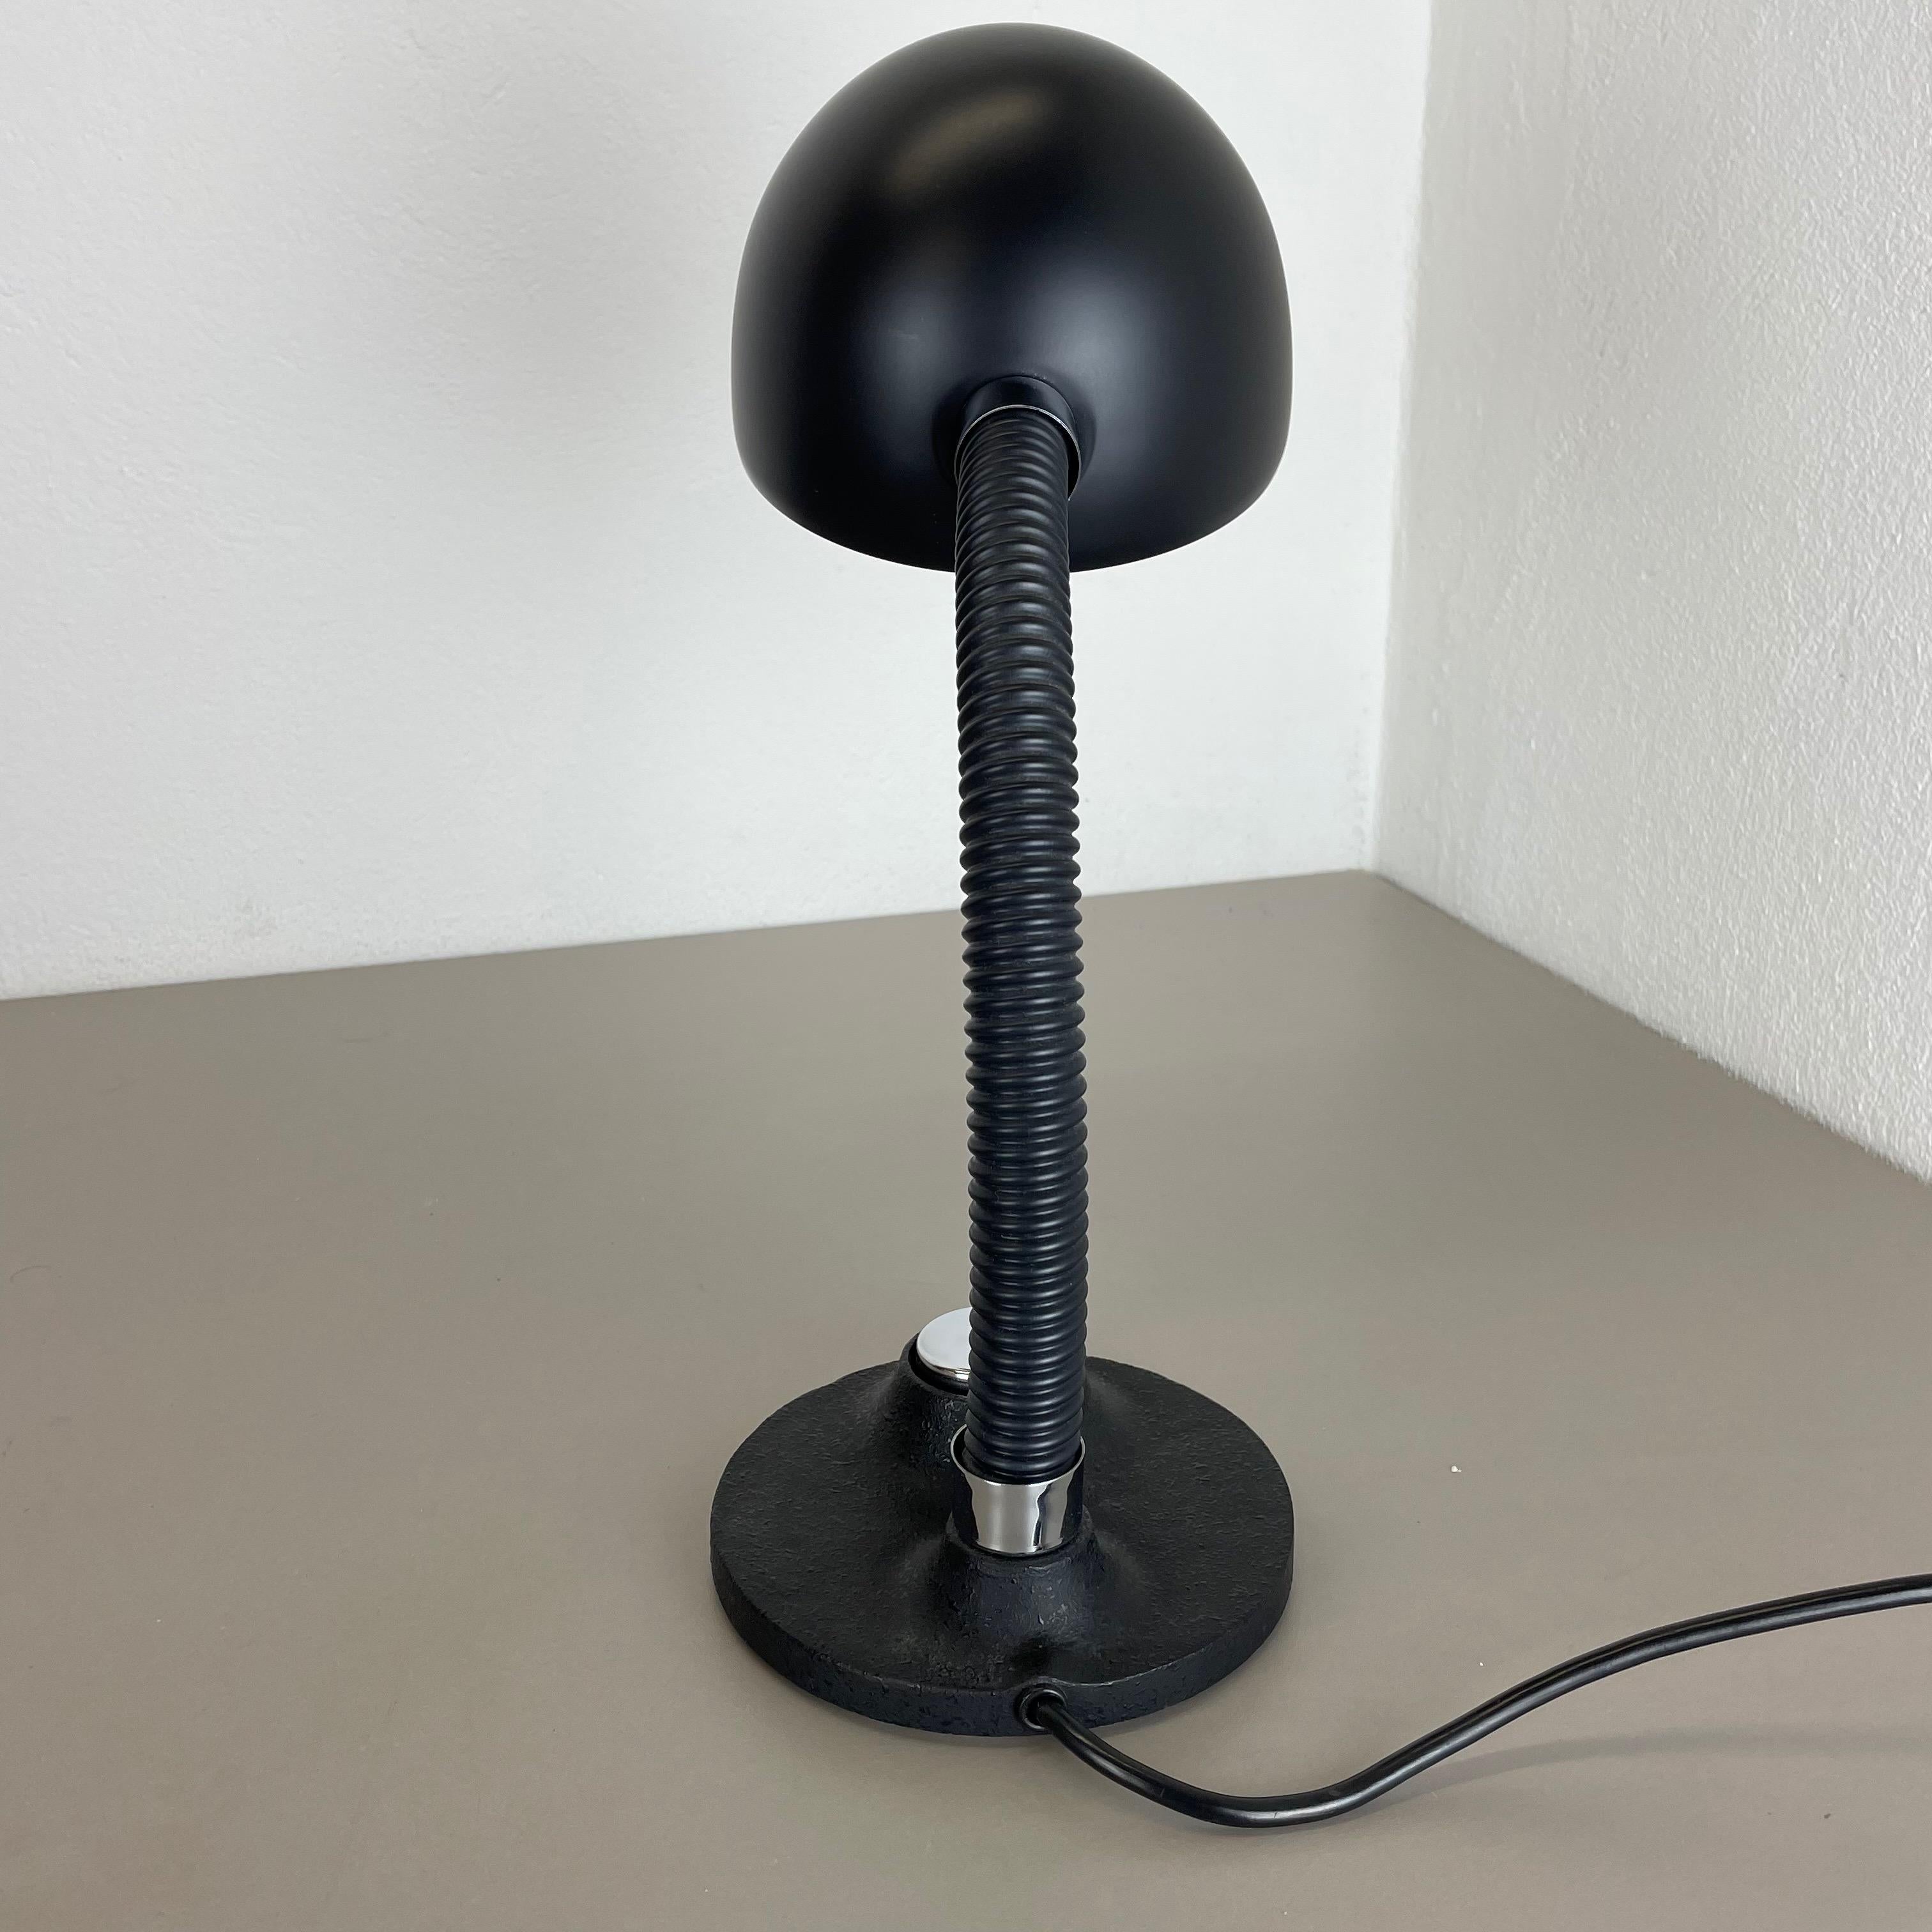 Modernist SPACE AGE Metal Table Light by Hillebrand Leuchten, Germany, 1970s For Sale 7